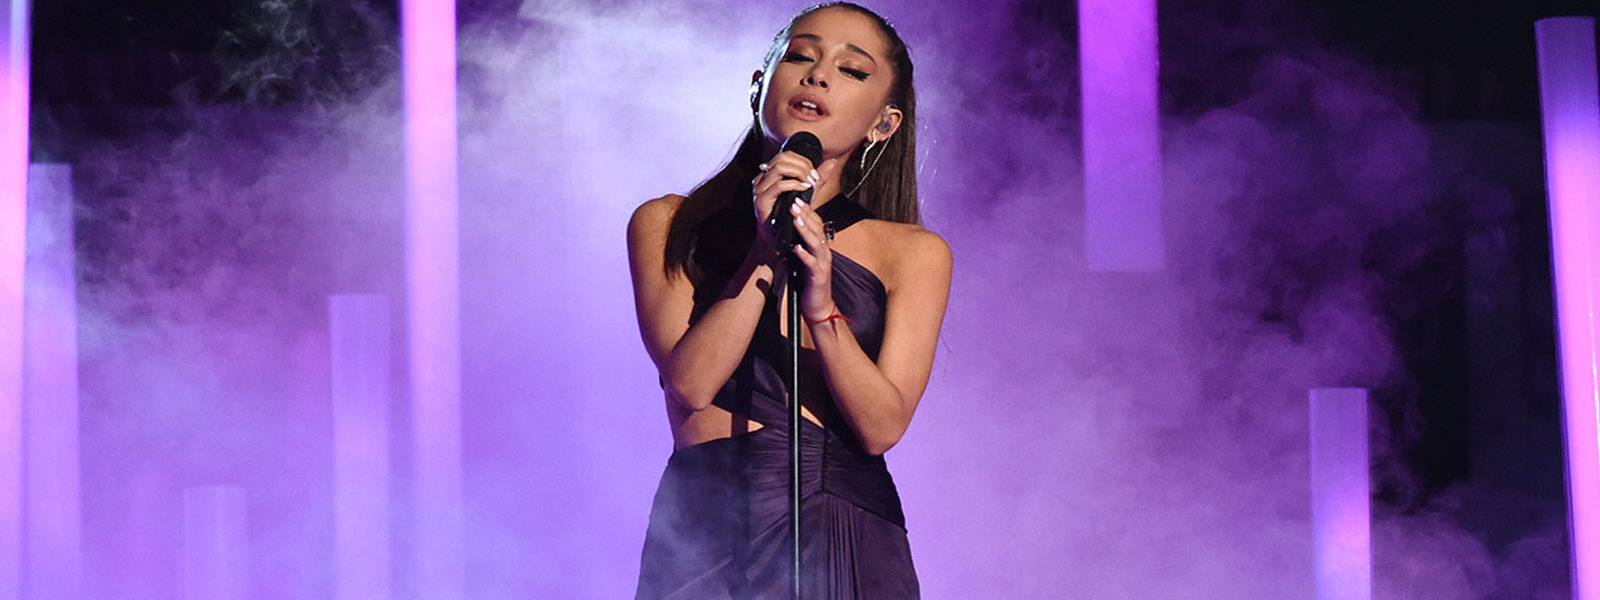 Ariana Grande pulls out of Brits tribute